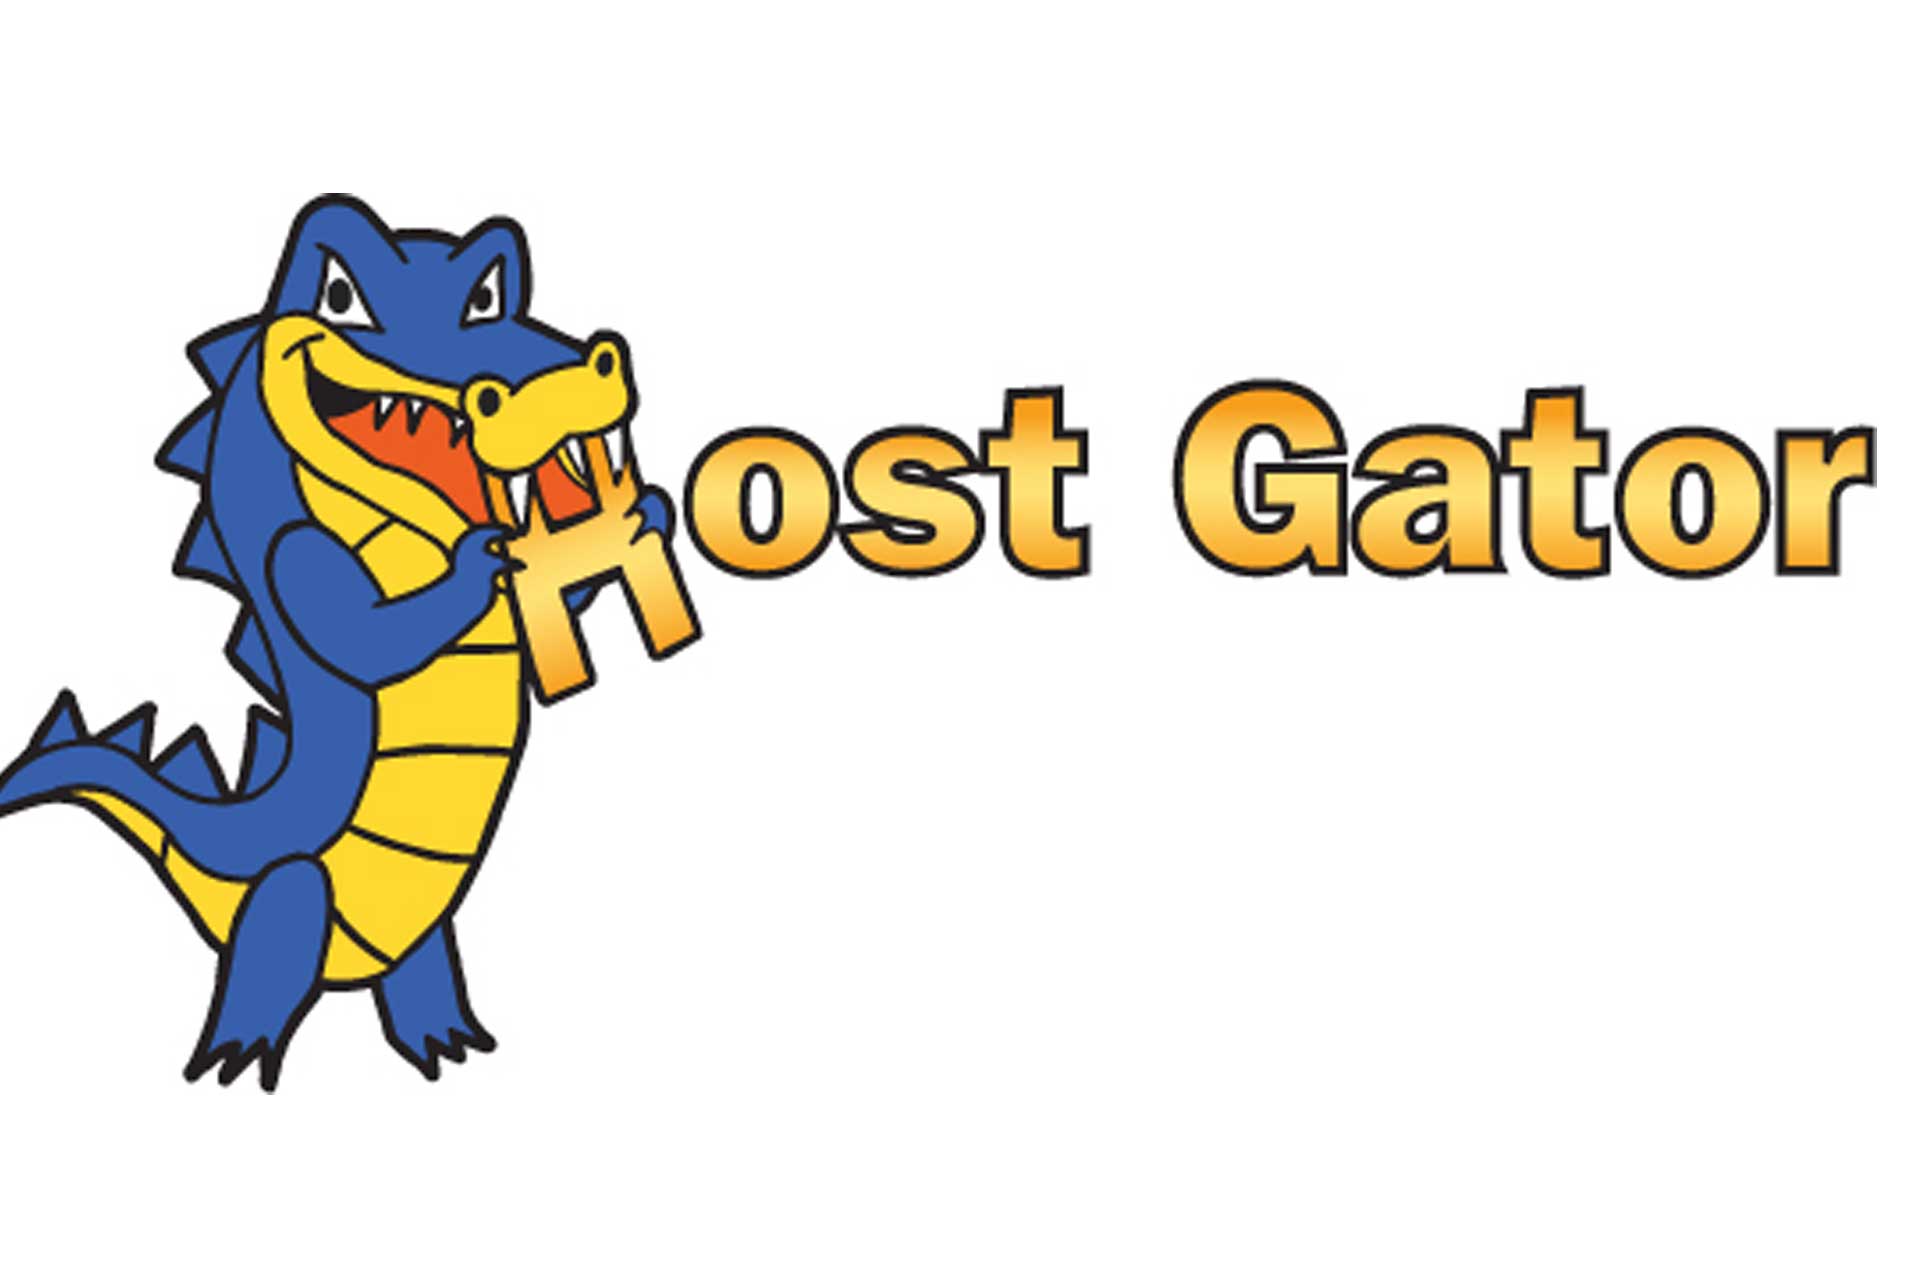 10 reasons why hostgator is the best hosting for businesses: a review